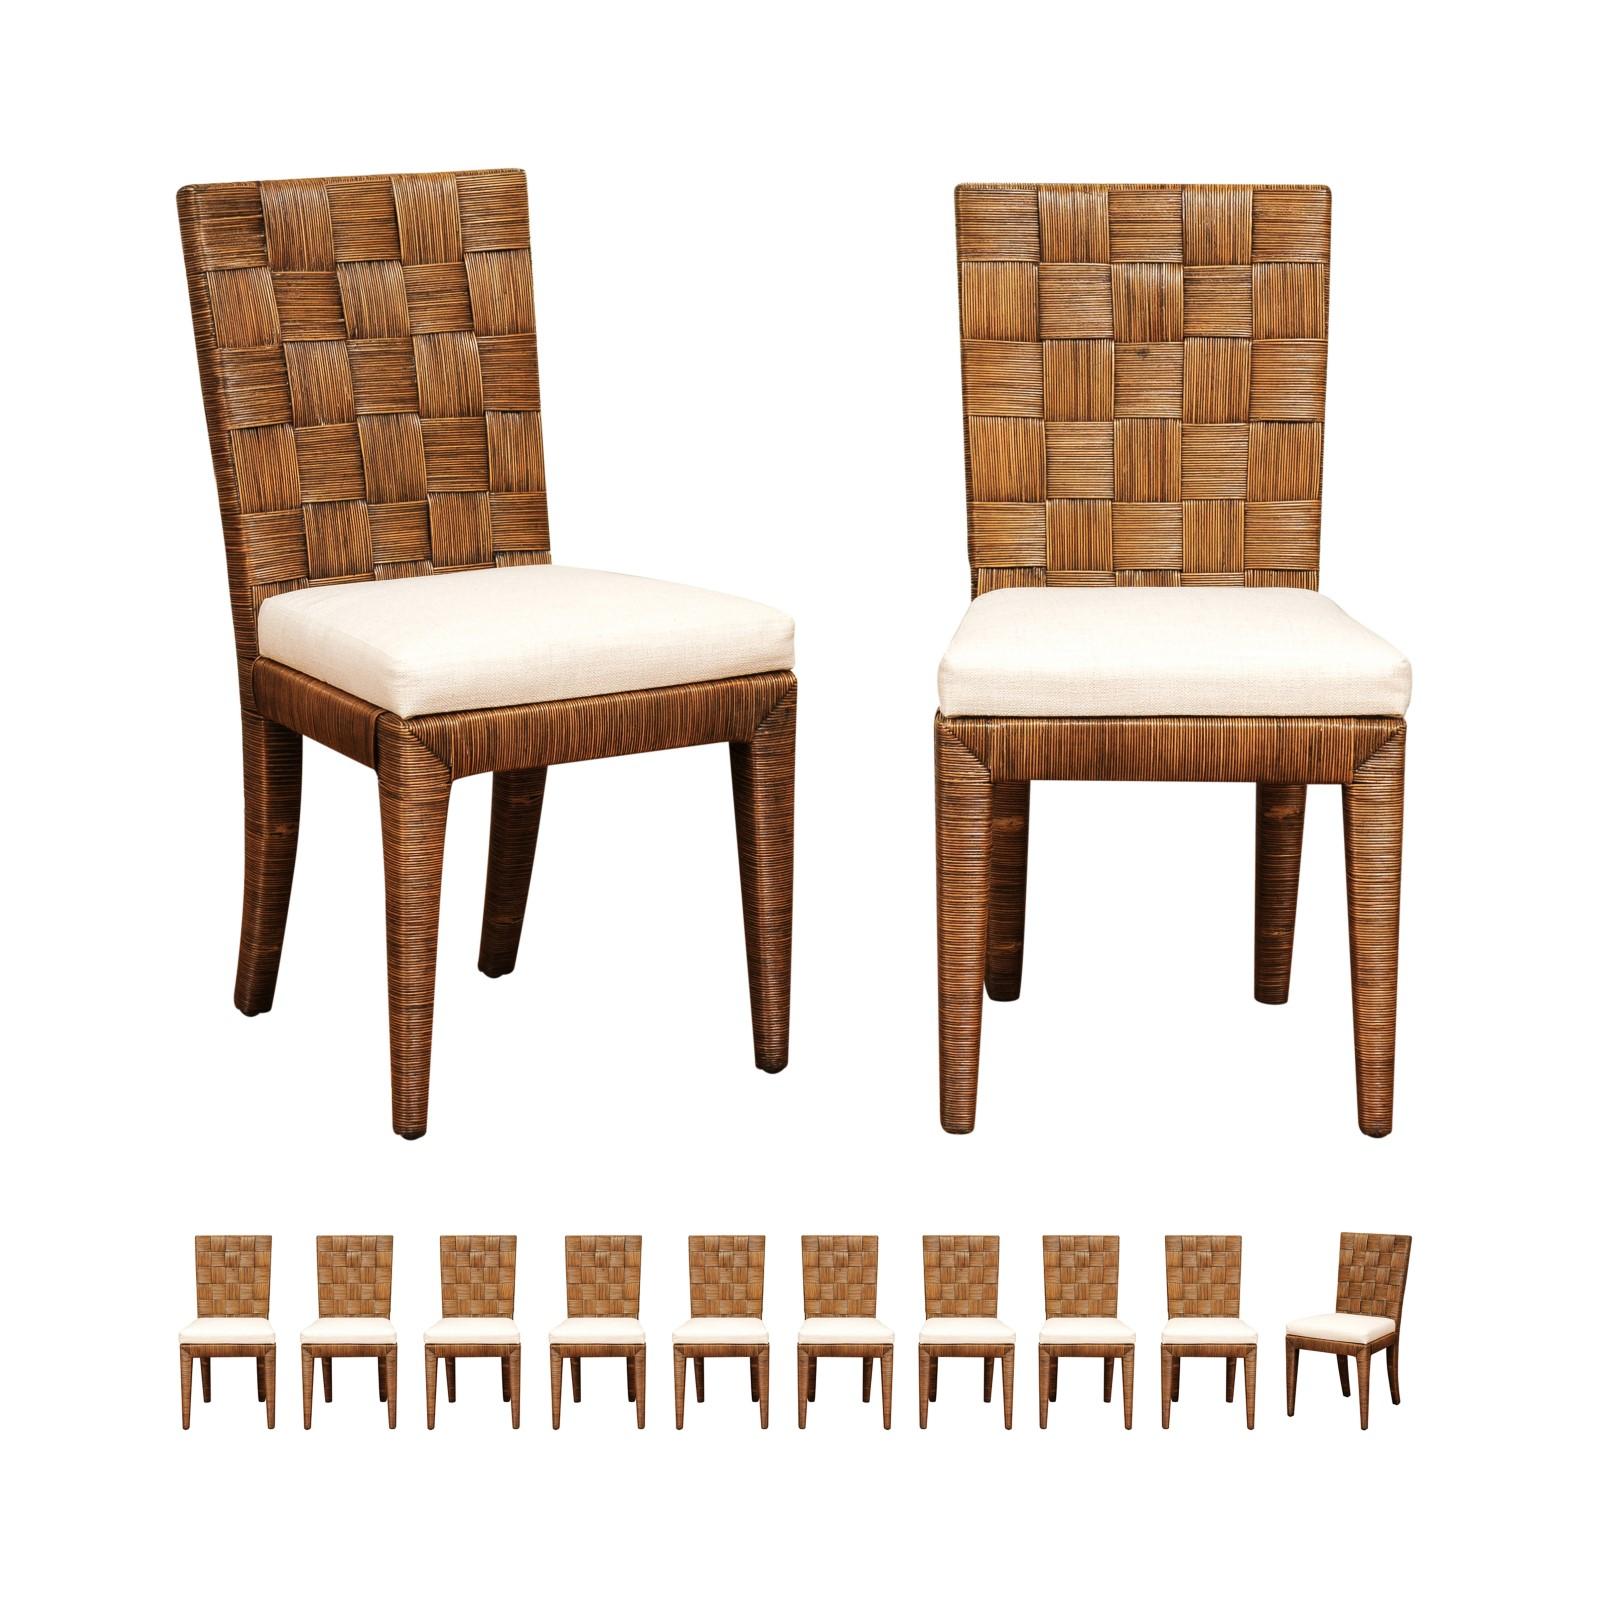 Stellar Set of 12 Vintage Block Island Cane Chairs by John Hutton for Donghia For Sale 13